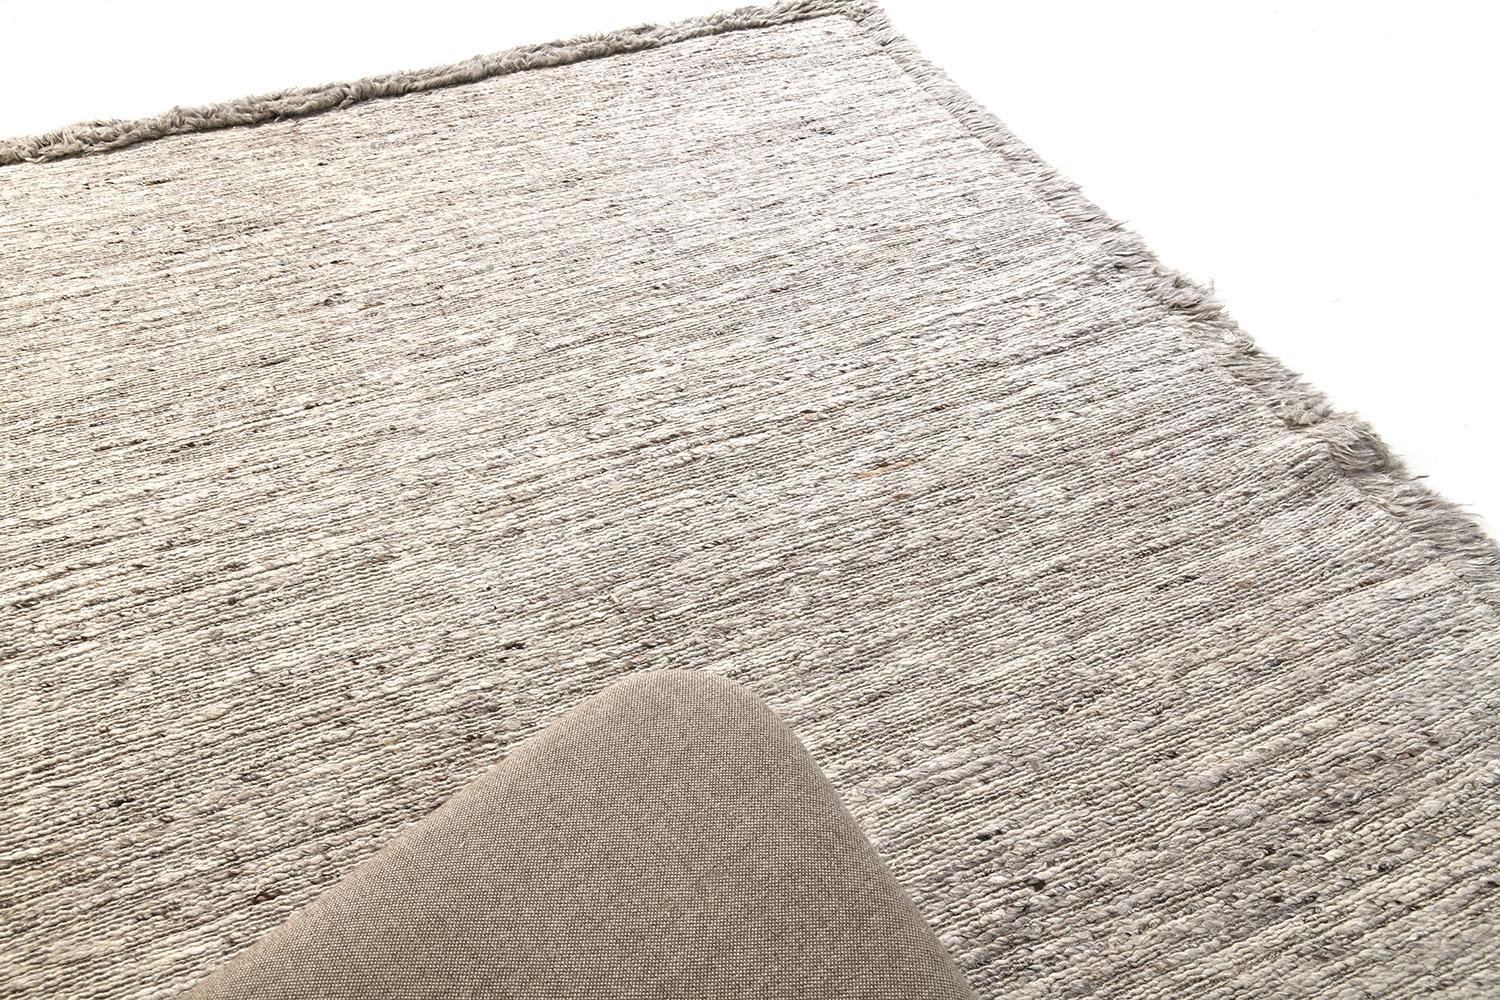 'Caleta' is a beautiful handwoven speckled natural grey flat-weave, bordered with a match shag exterior. A simple yet interesting design, 'Caleta' is a luxurious and timely design that will elevate any space. Mehraban's Sabbia collection is unique